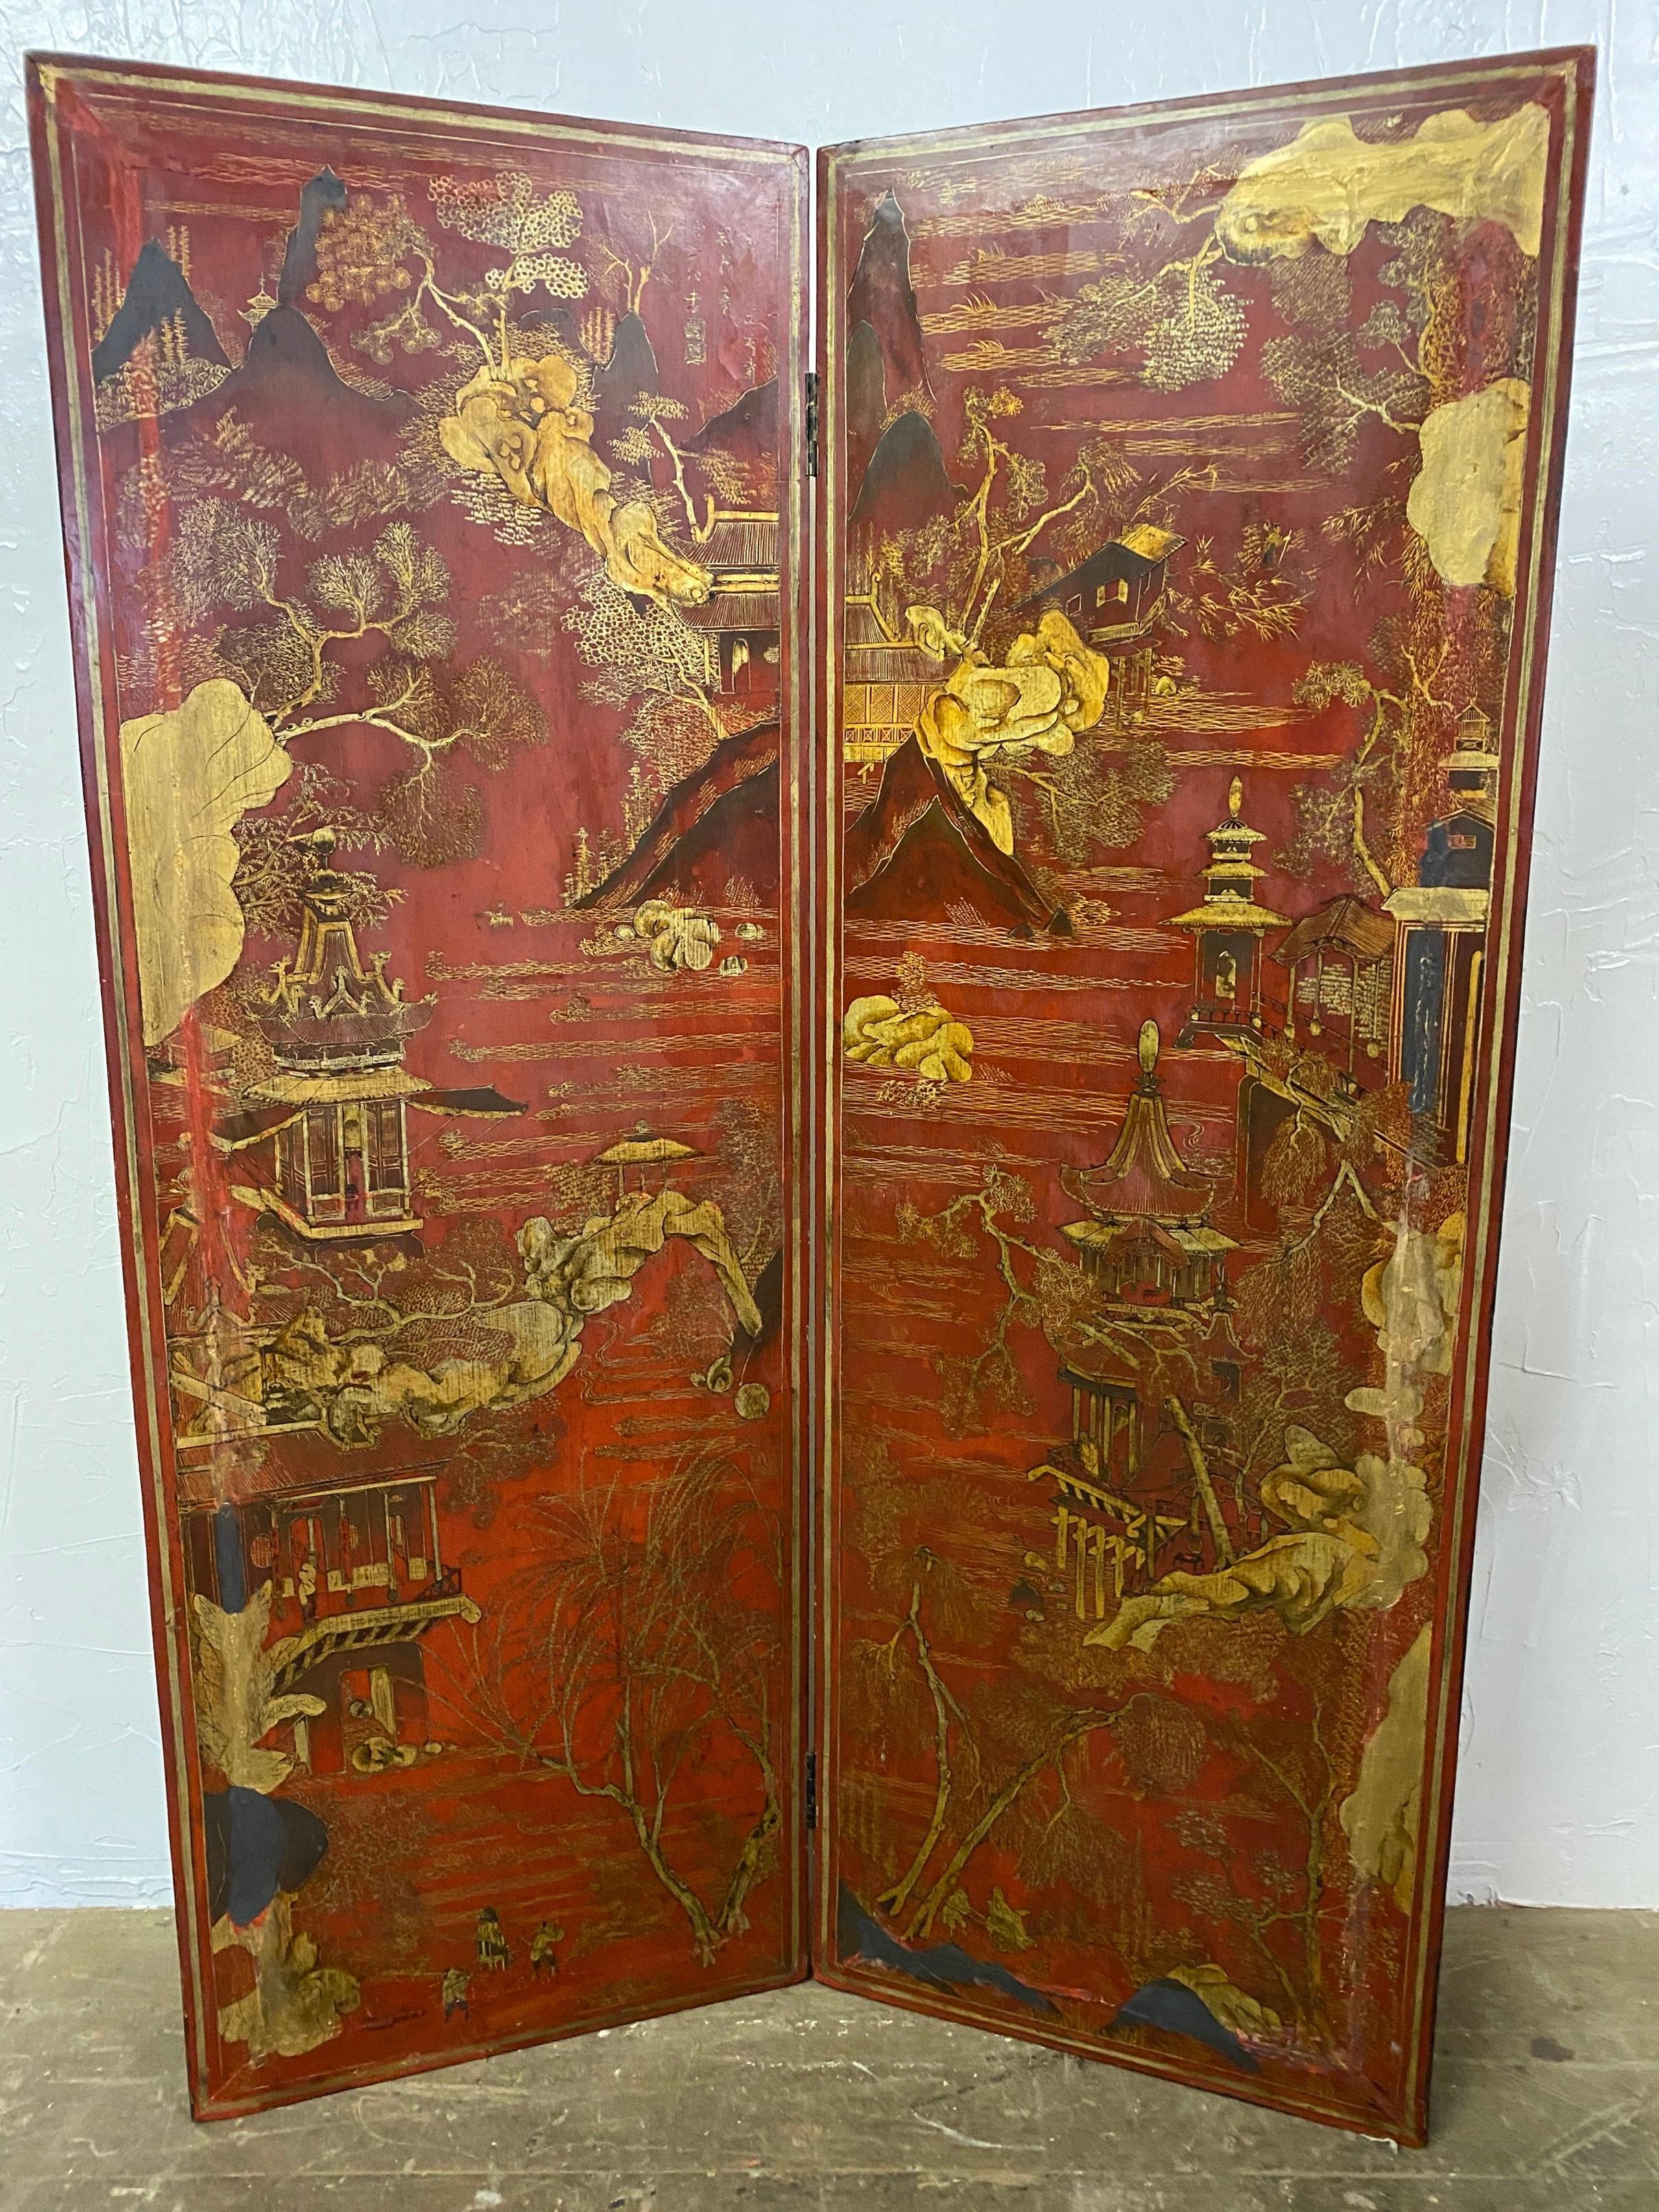 A beautifully enamel painted early Asian two part wooden folding screen, each section measuring 19.5